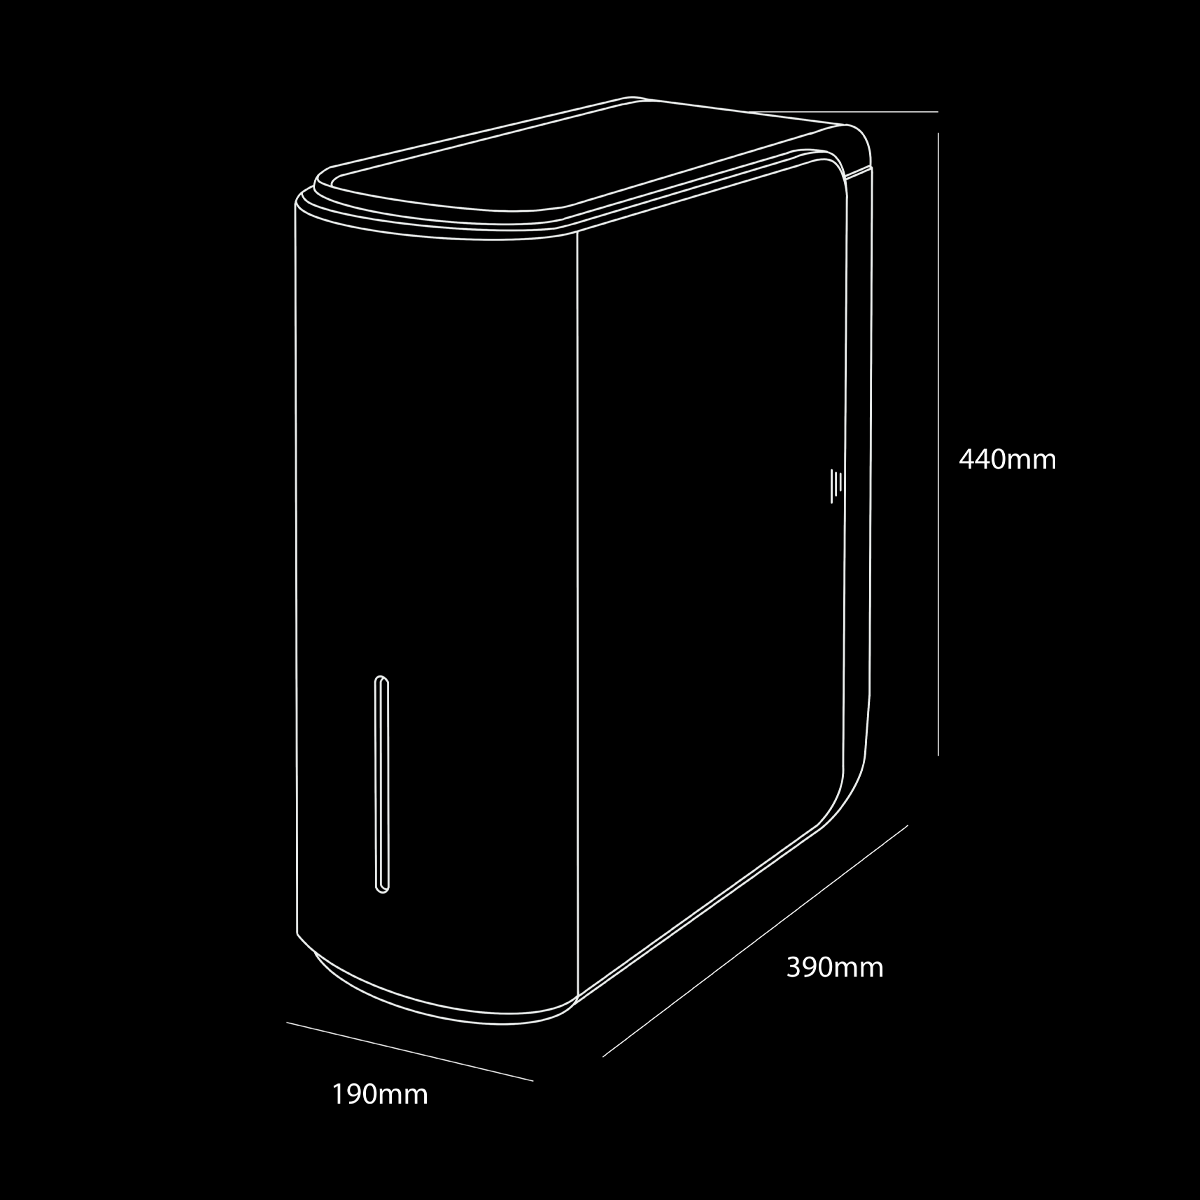 Gemini-Schematic-RO-(purifier)-product-images